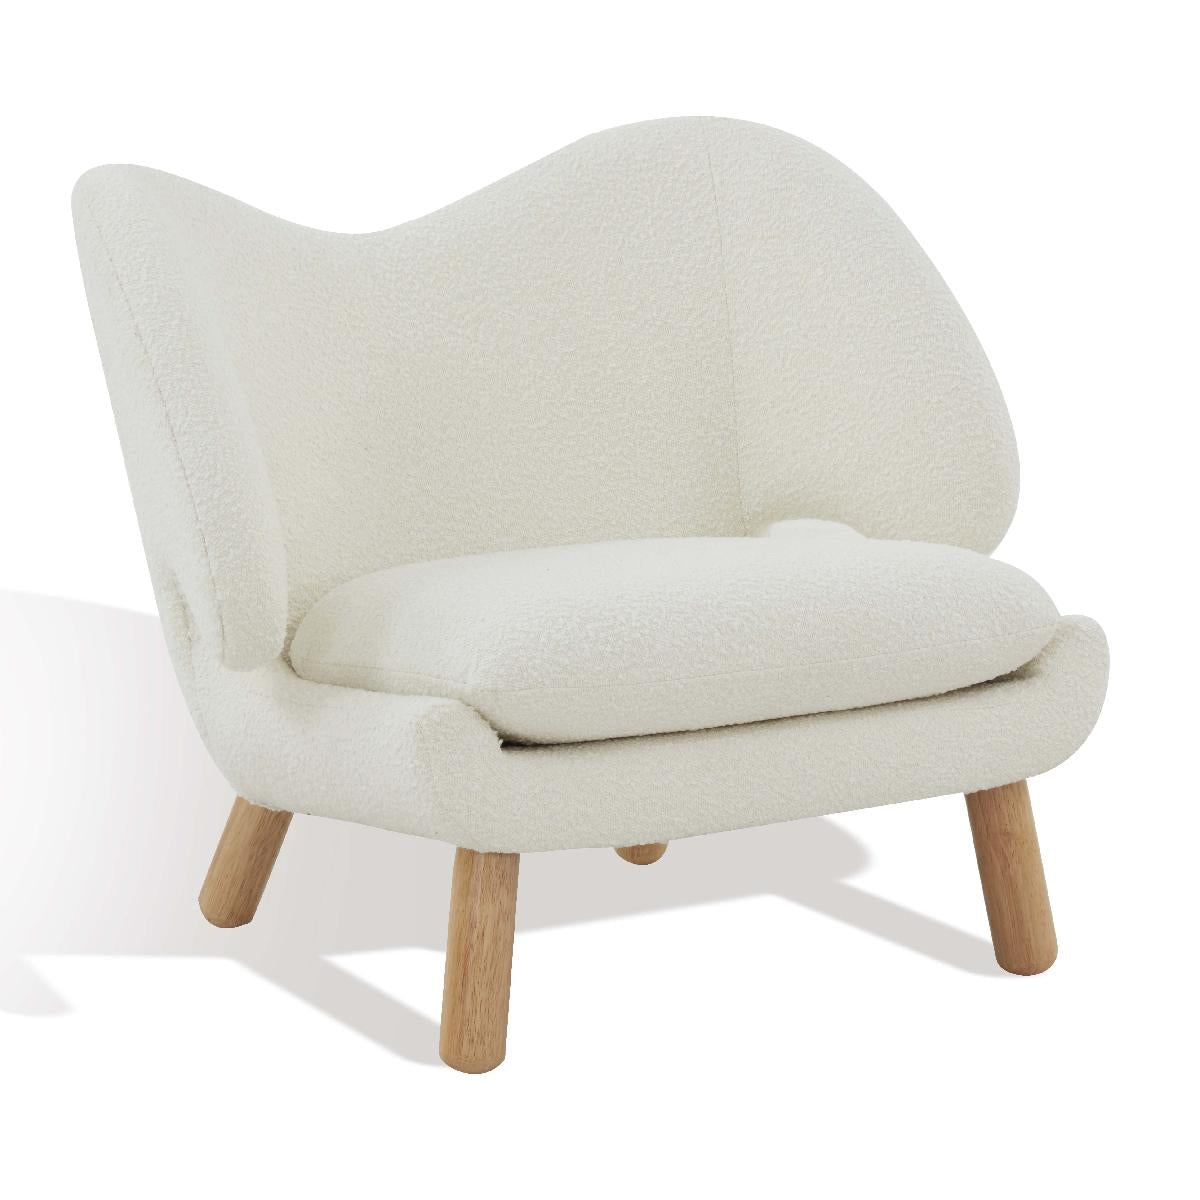 Safavieh Couture Felicia Contemporary Accent Chair